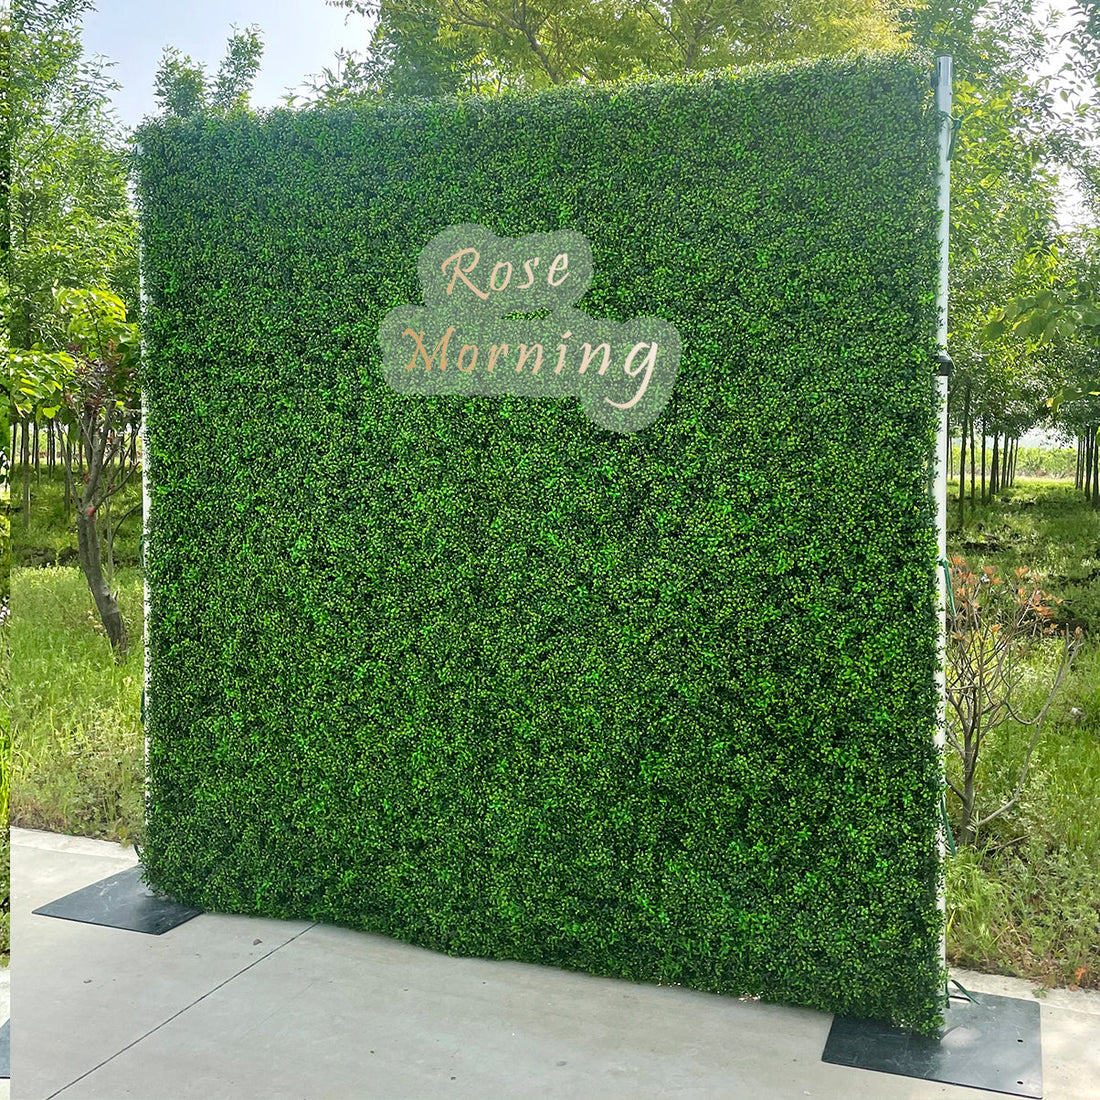 Lucky: 2D  Fabric Artificial Green Wall Rolling Up Curtain Green Wall R168 - 8ft*8ft Rose Morning